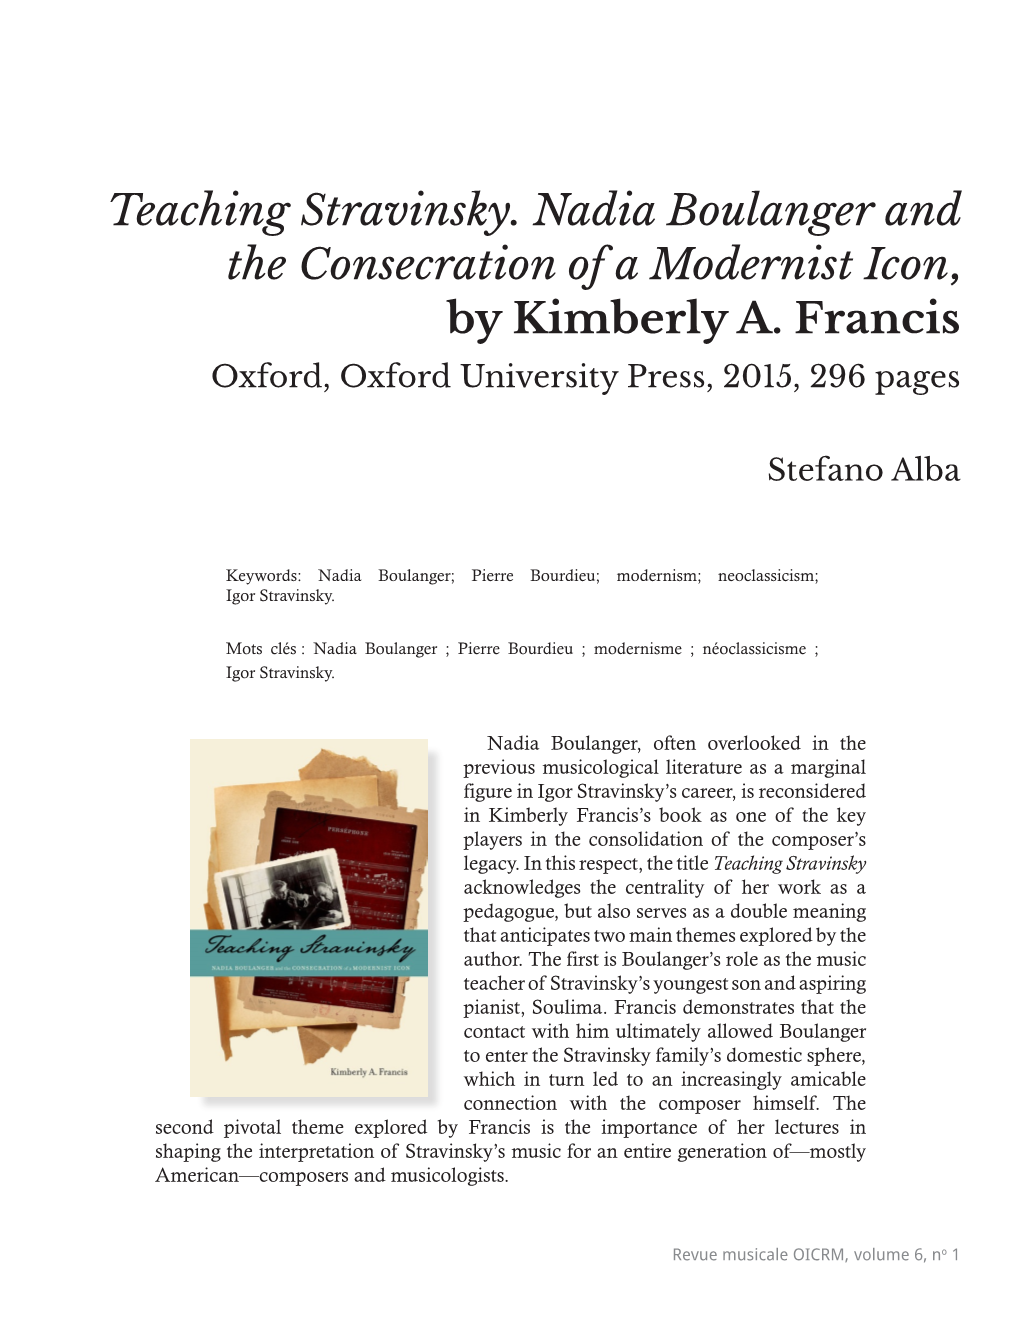 Teaching Stravinsky. Nadia Boulanger and the Consecration of a Modernist Icon, by Kimberly A